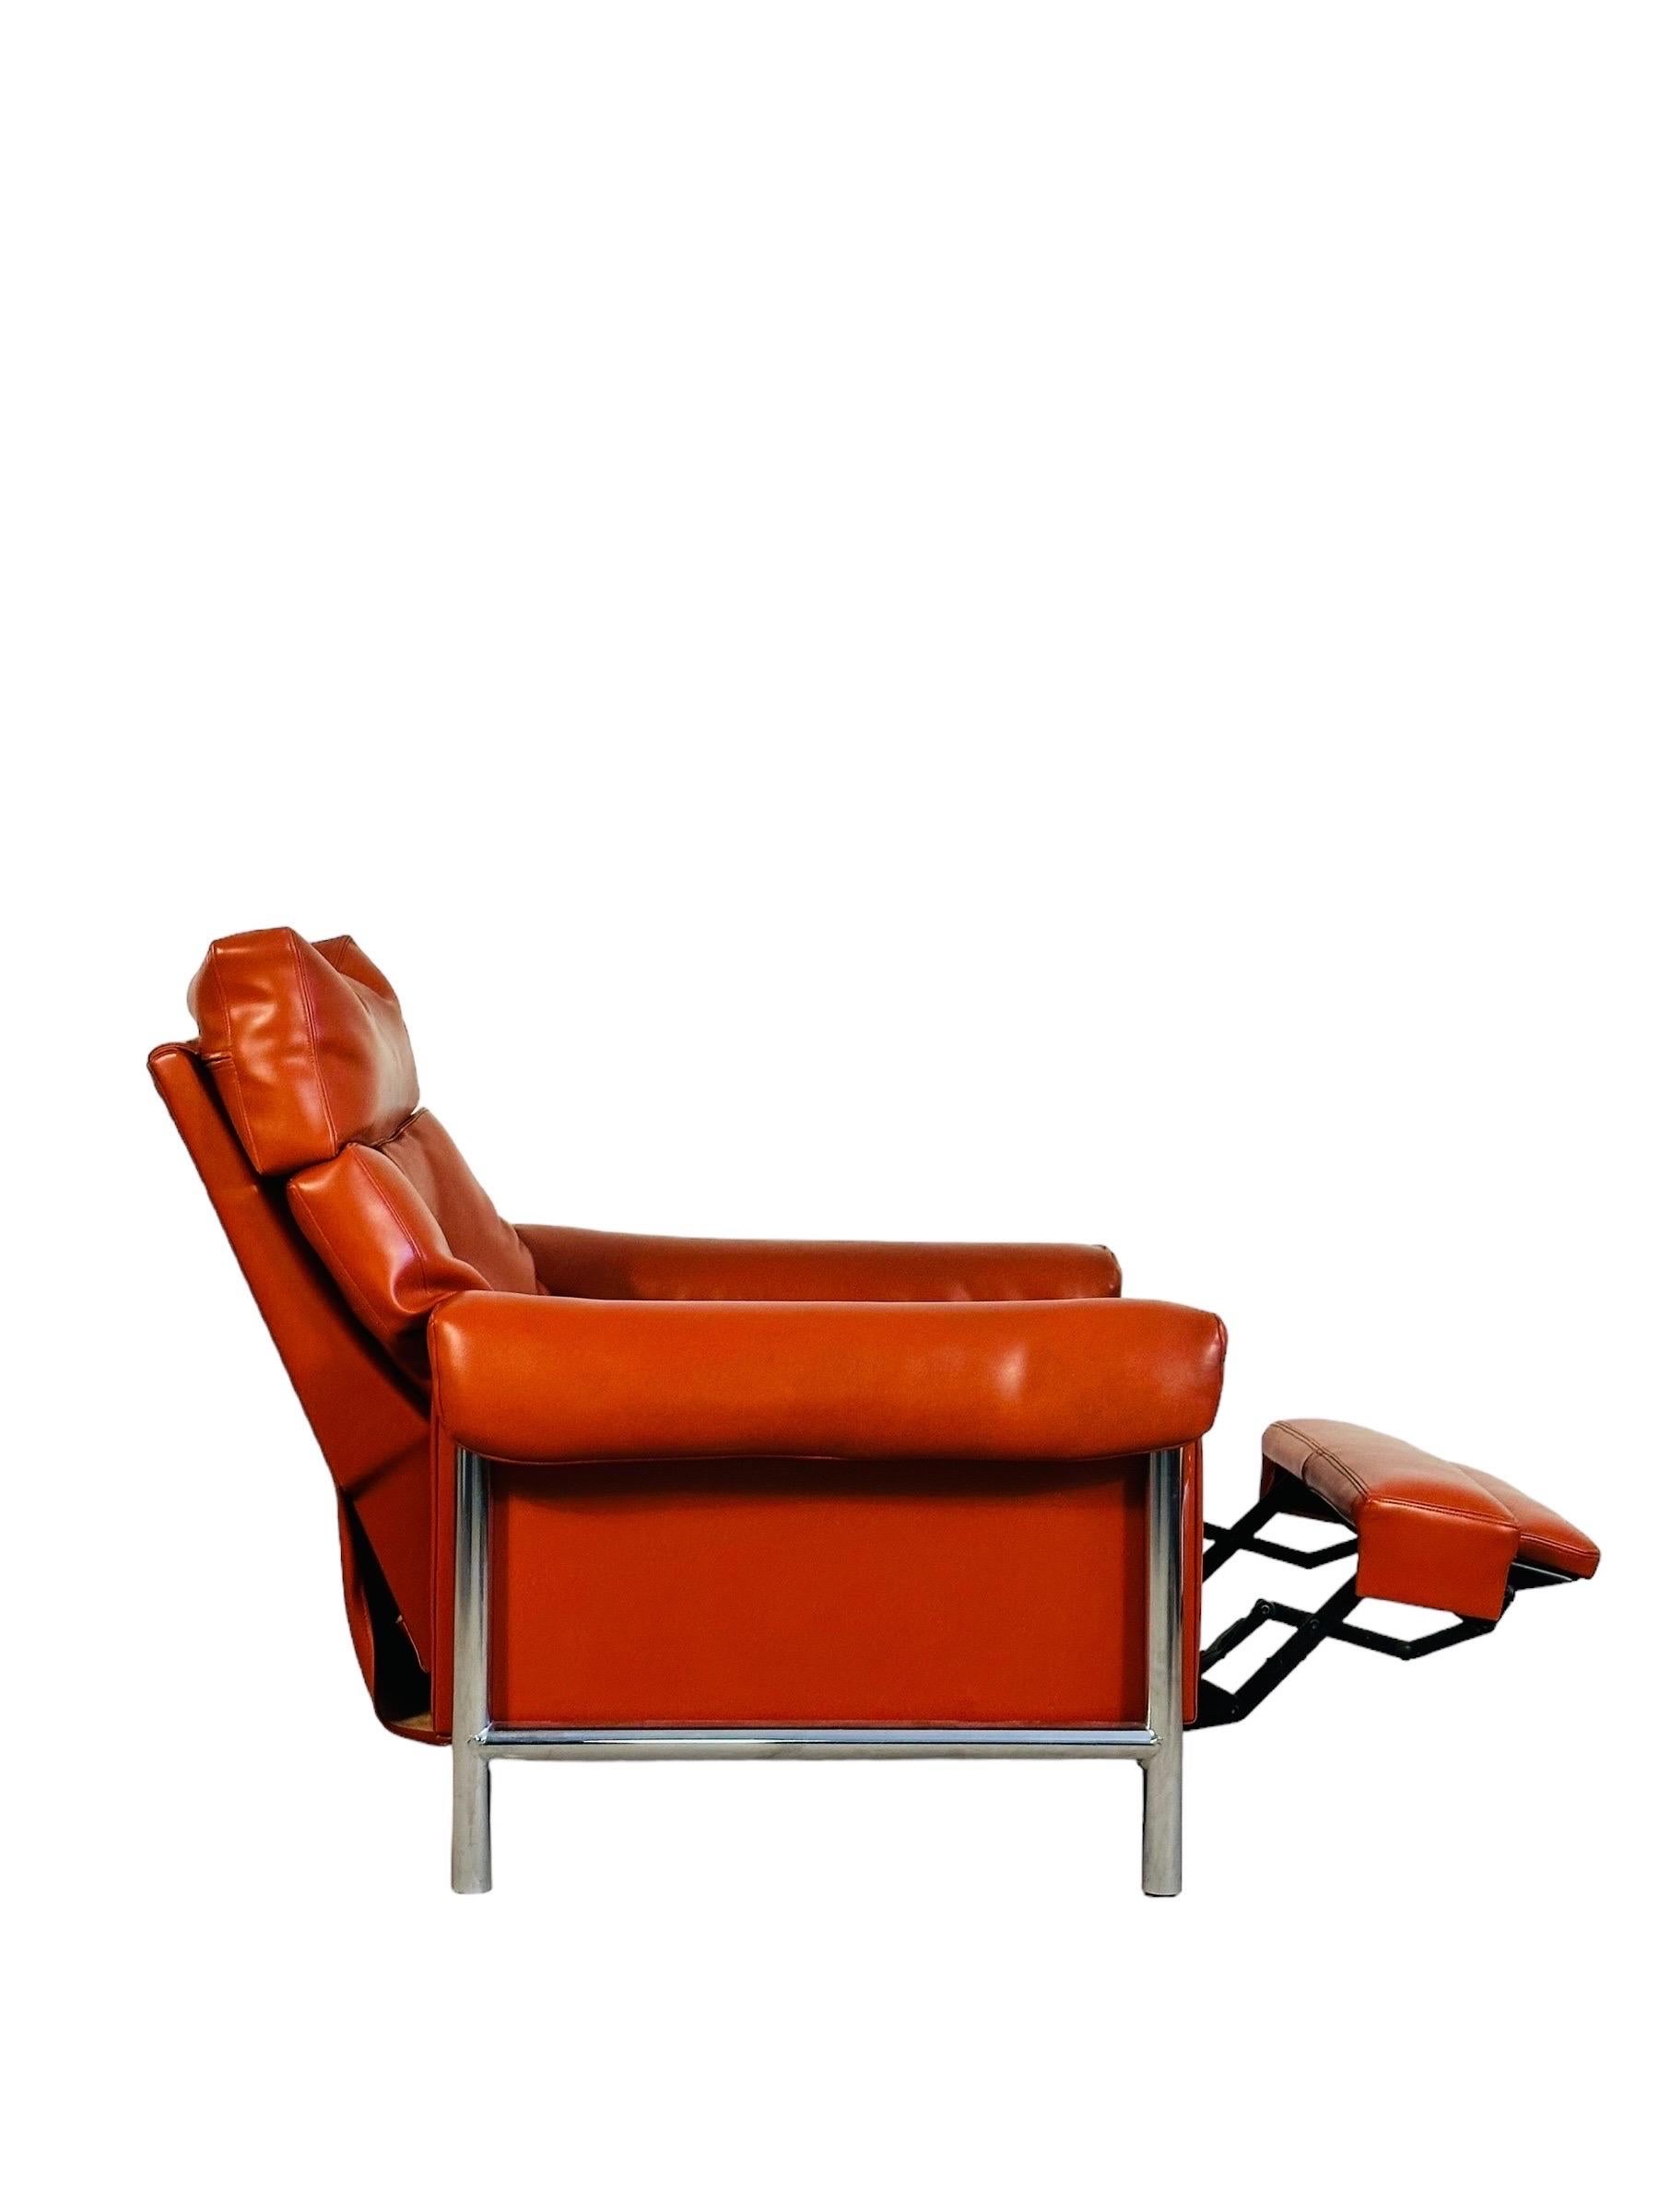 Mid Century Modern Chrome Recliner Lounge Chair In Good Condition For Sale In Brooklyn, NY